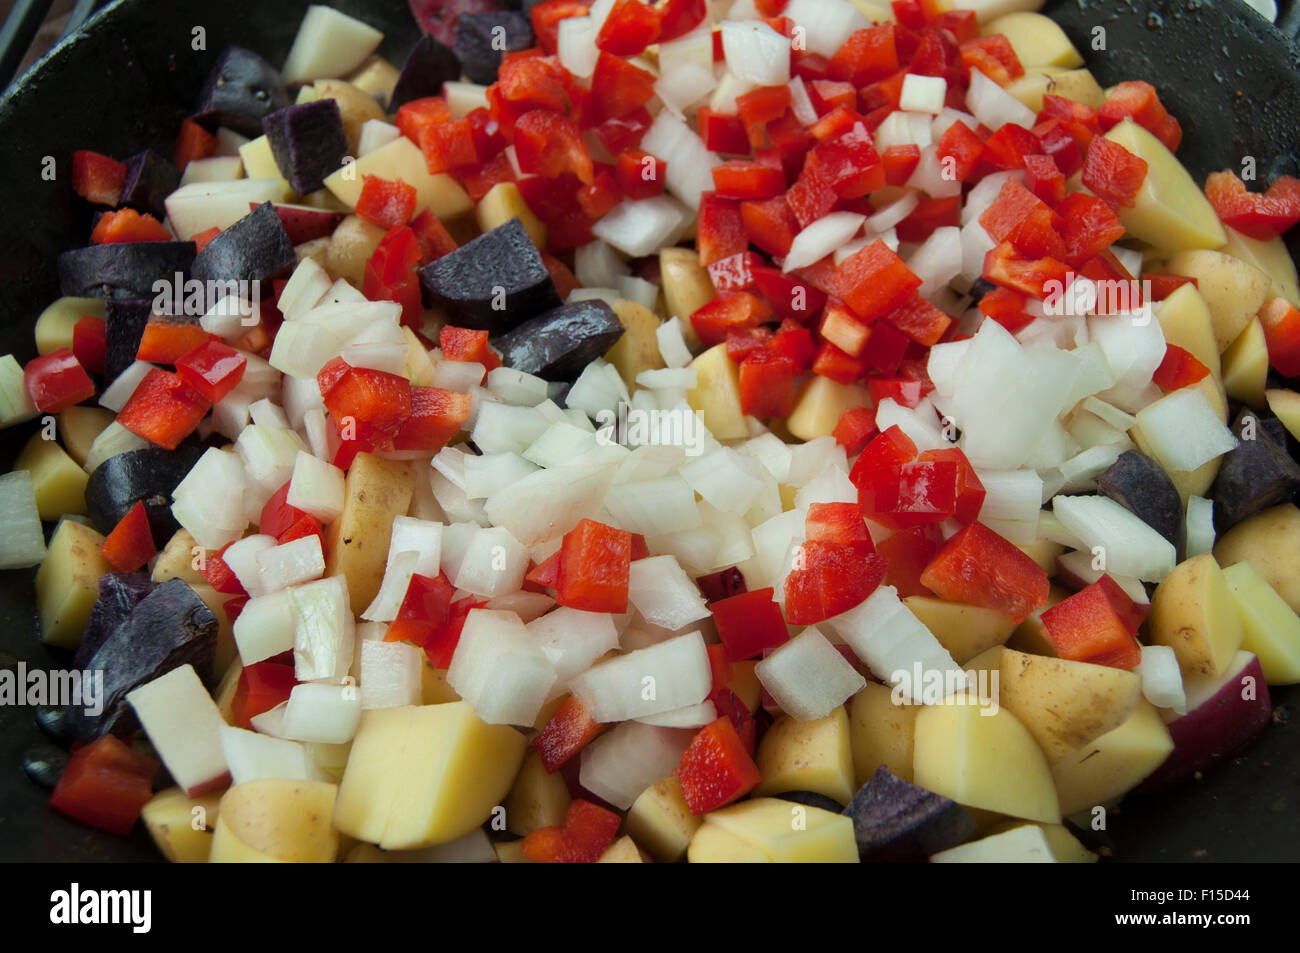 Vegetables, cut and prepared for cooking. Stock Photo